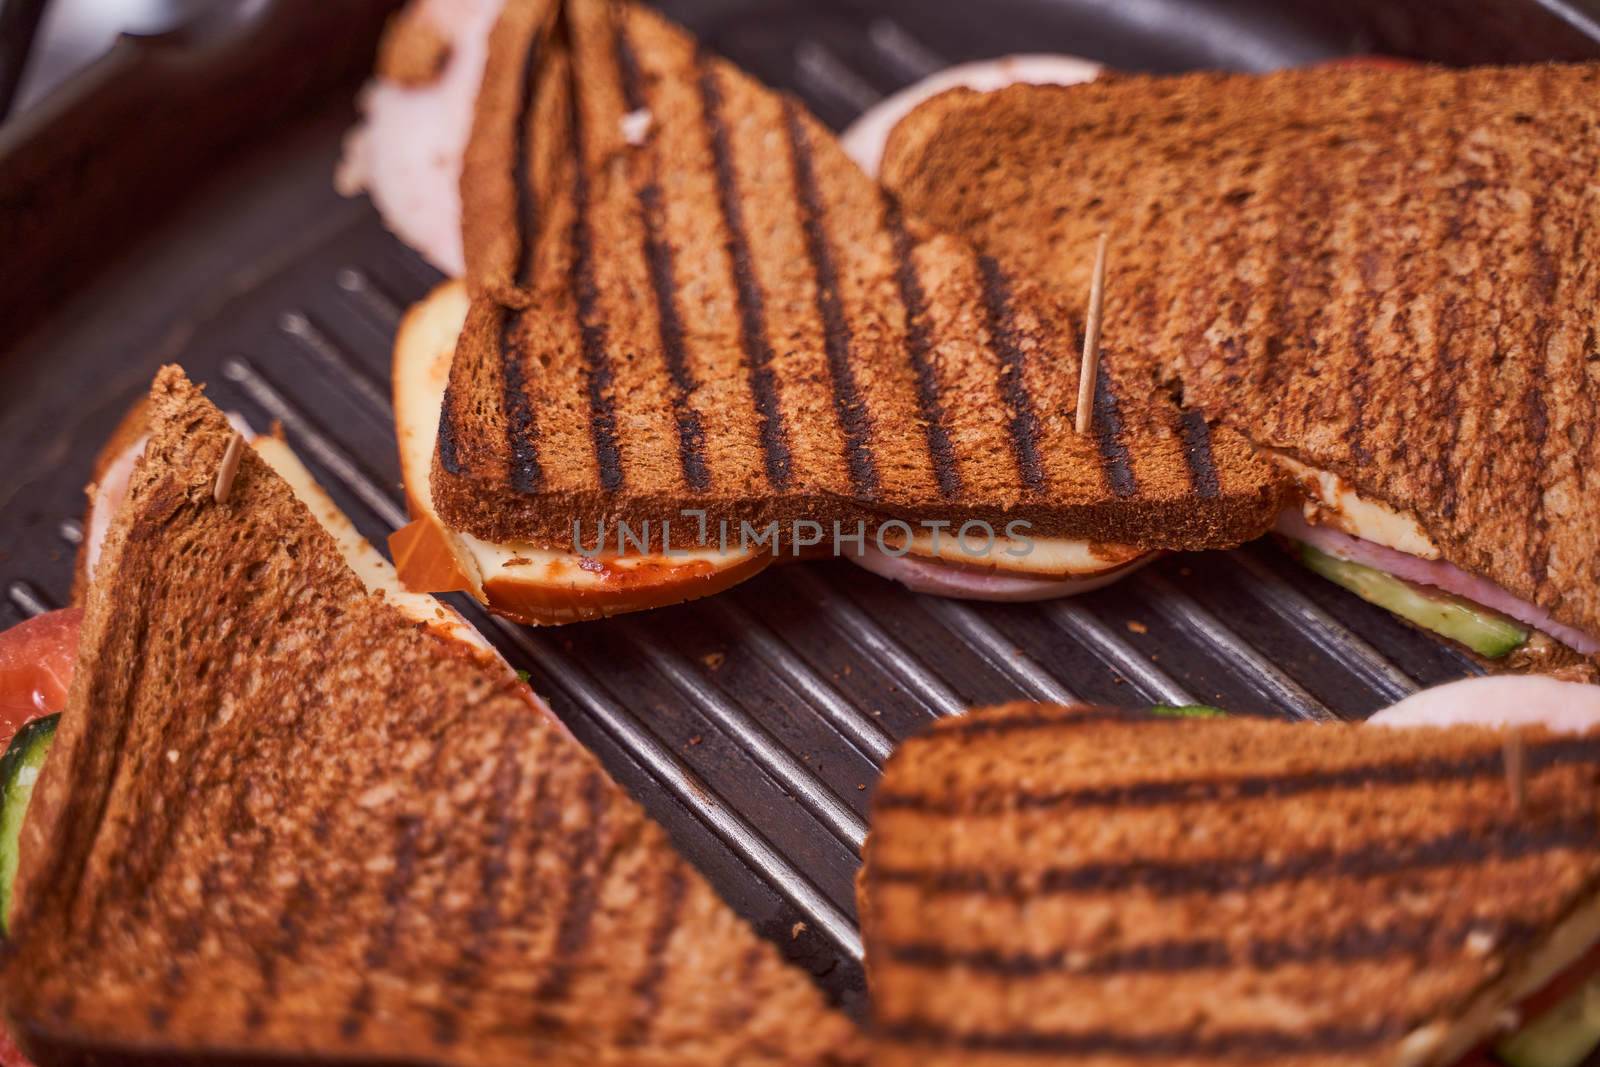 Homemade sandwiches lie on the groa grill. High quality photo